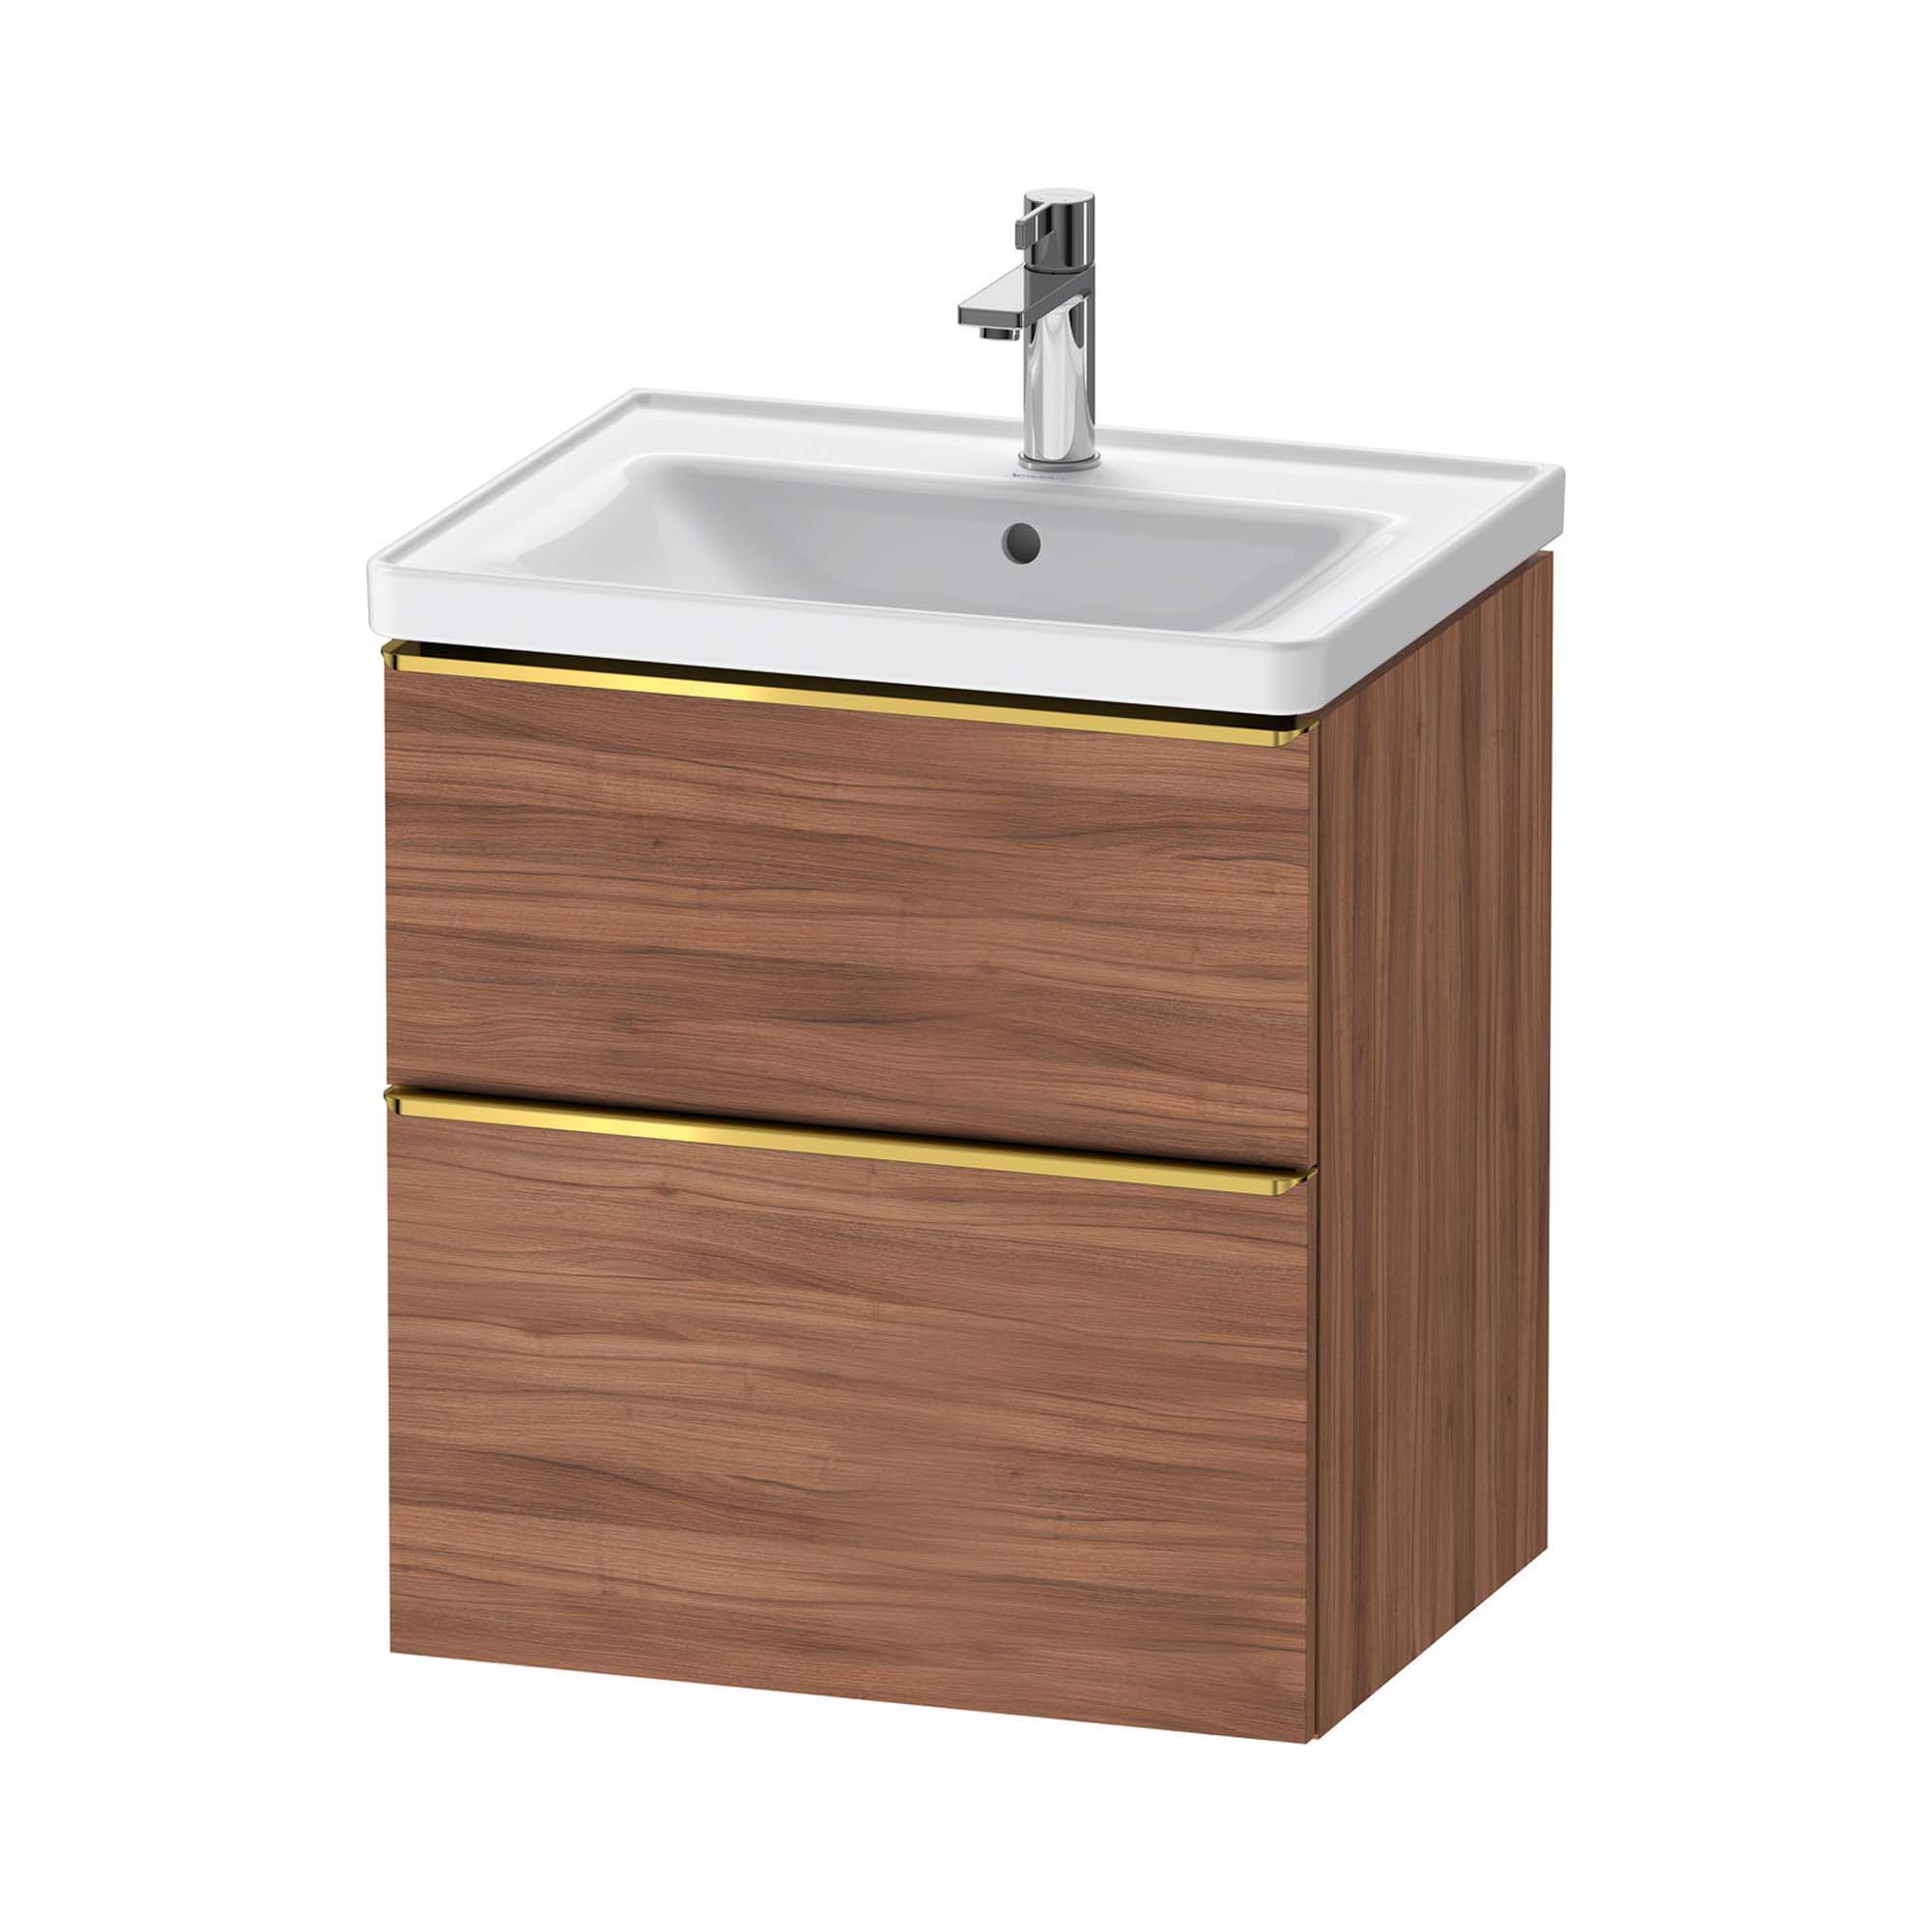 duravit d-neo 600 wall mounted vanity unit with d-neo basin walnut gold handles